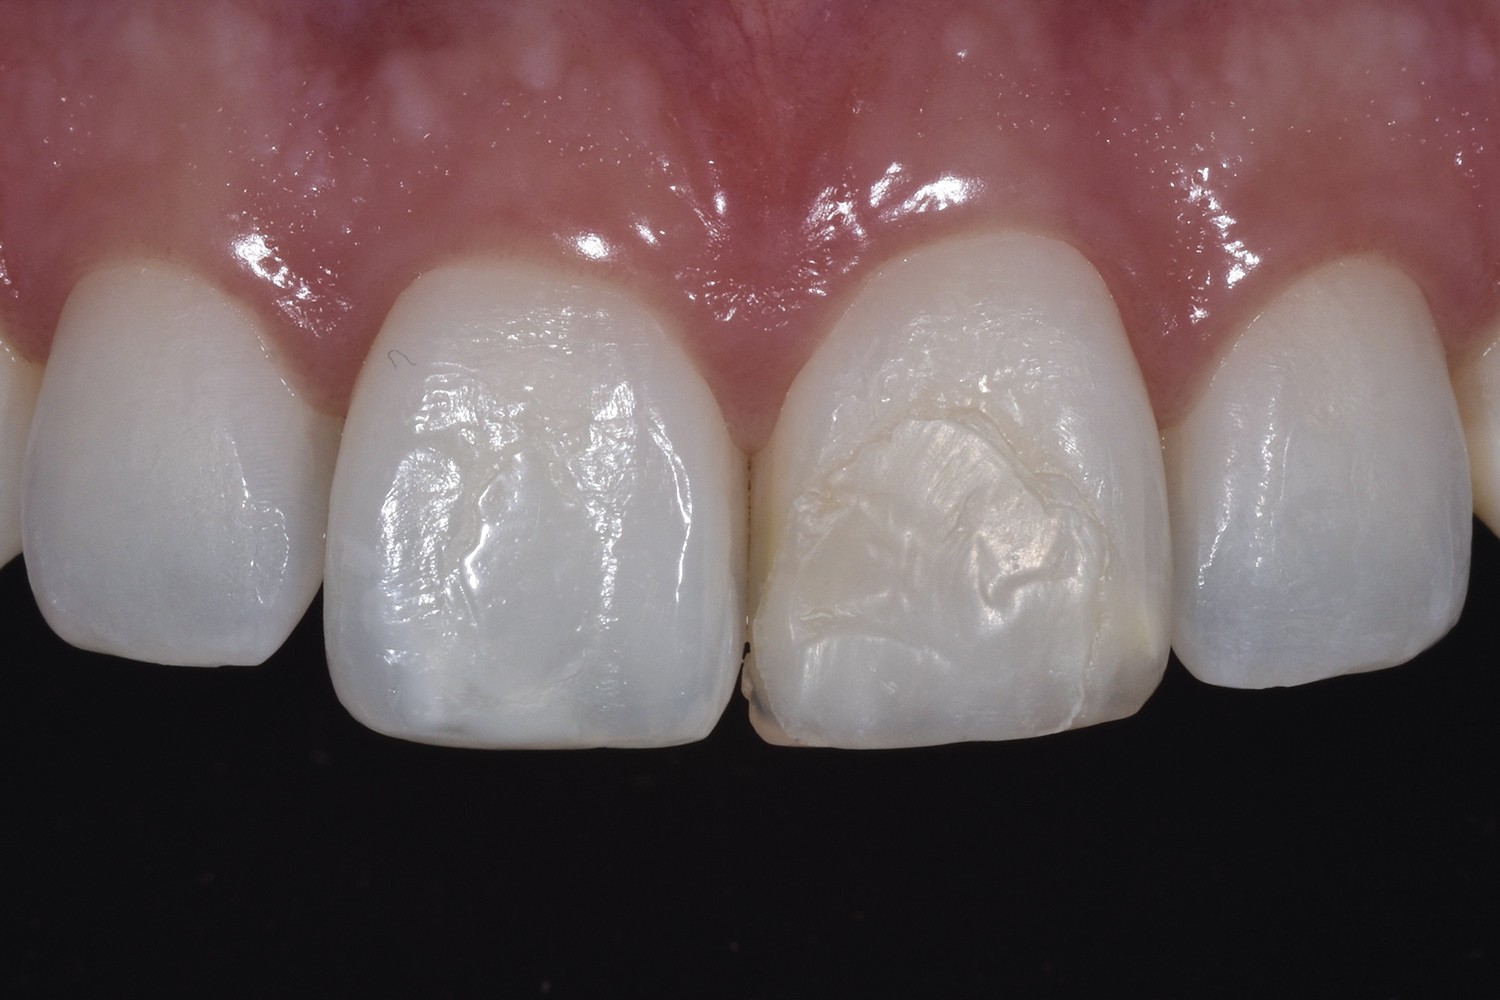 Conservative clinical solutions to molar incisor hypomineralization 